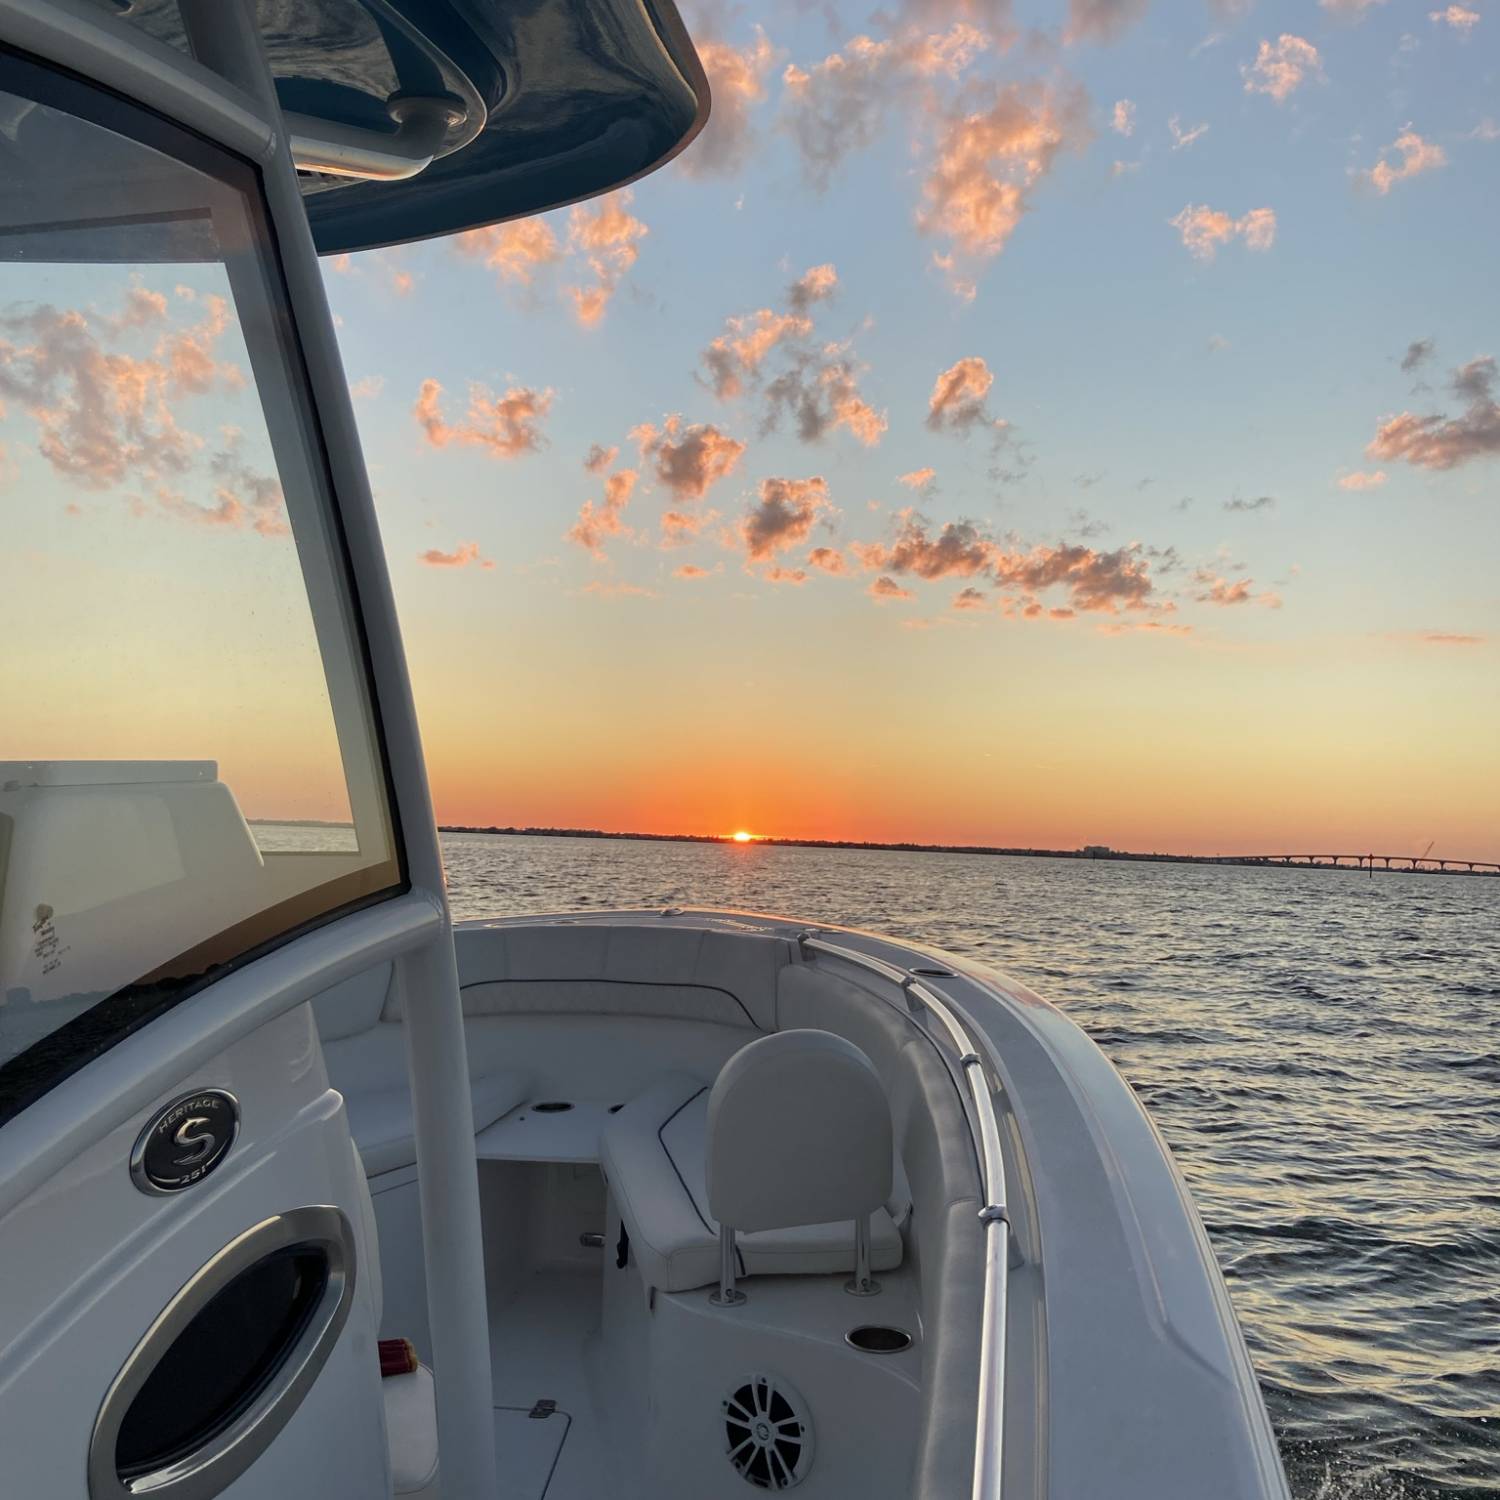 Title: My bestie - On board their Sportsman Open 262 Center Console - Location: Tierra verde, fl. Participating in the Photo Contest #SportsmanJuly